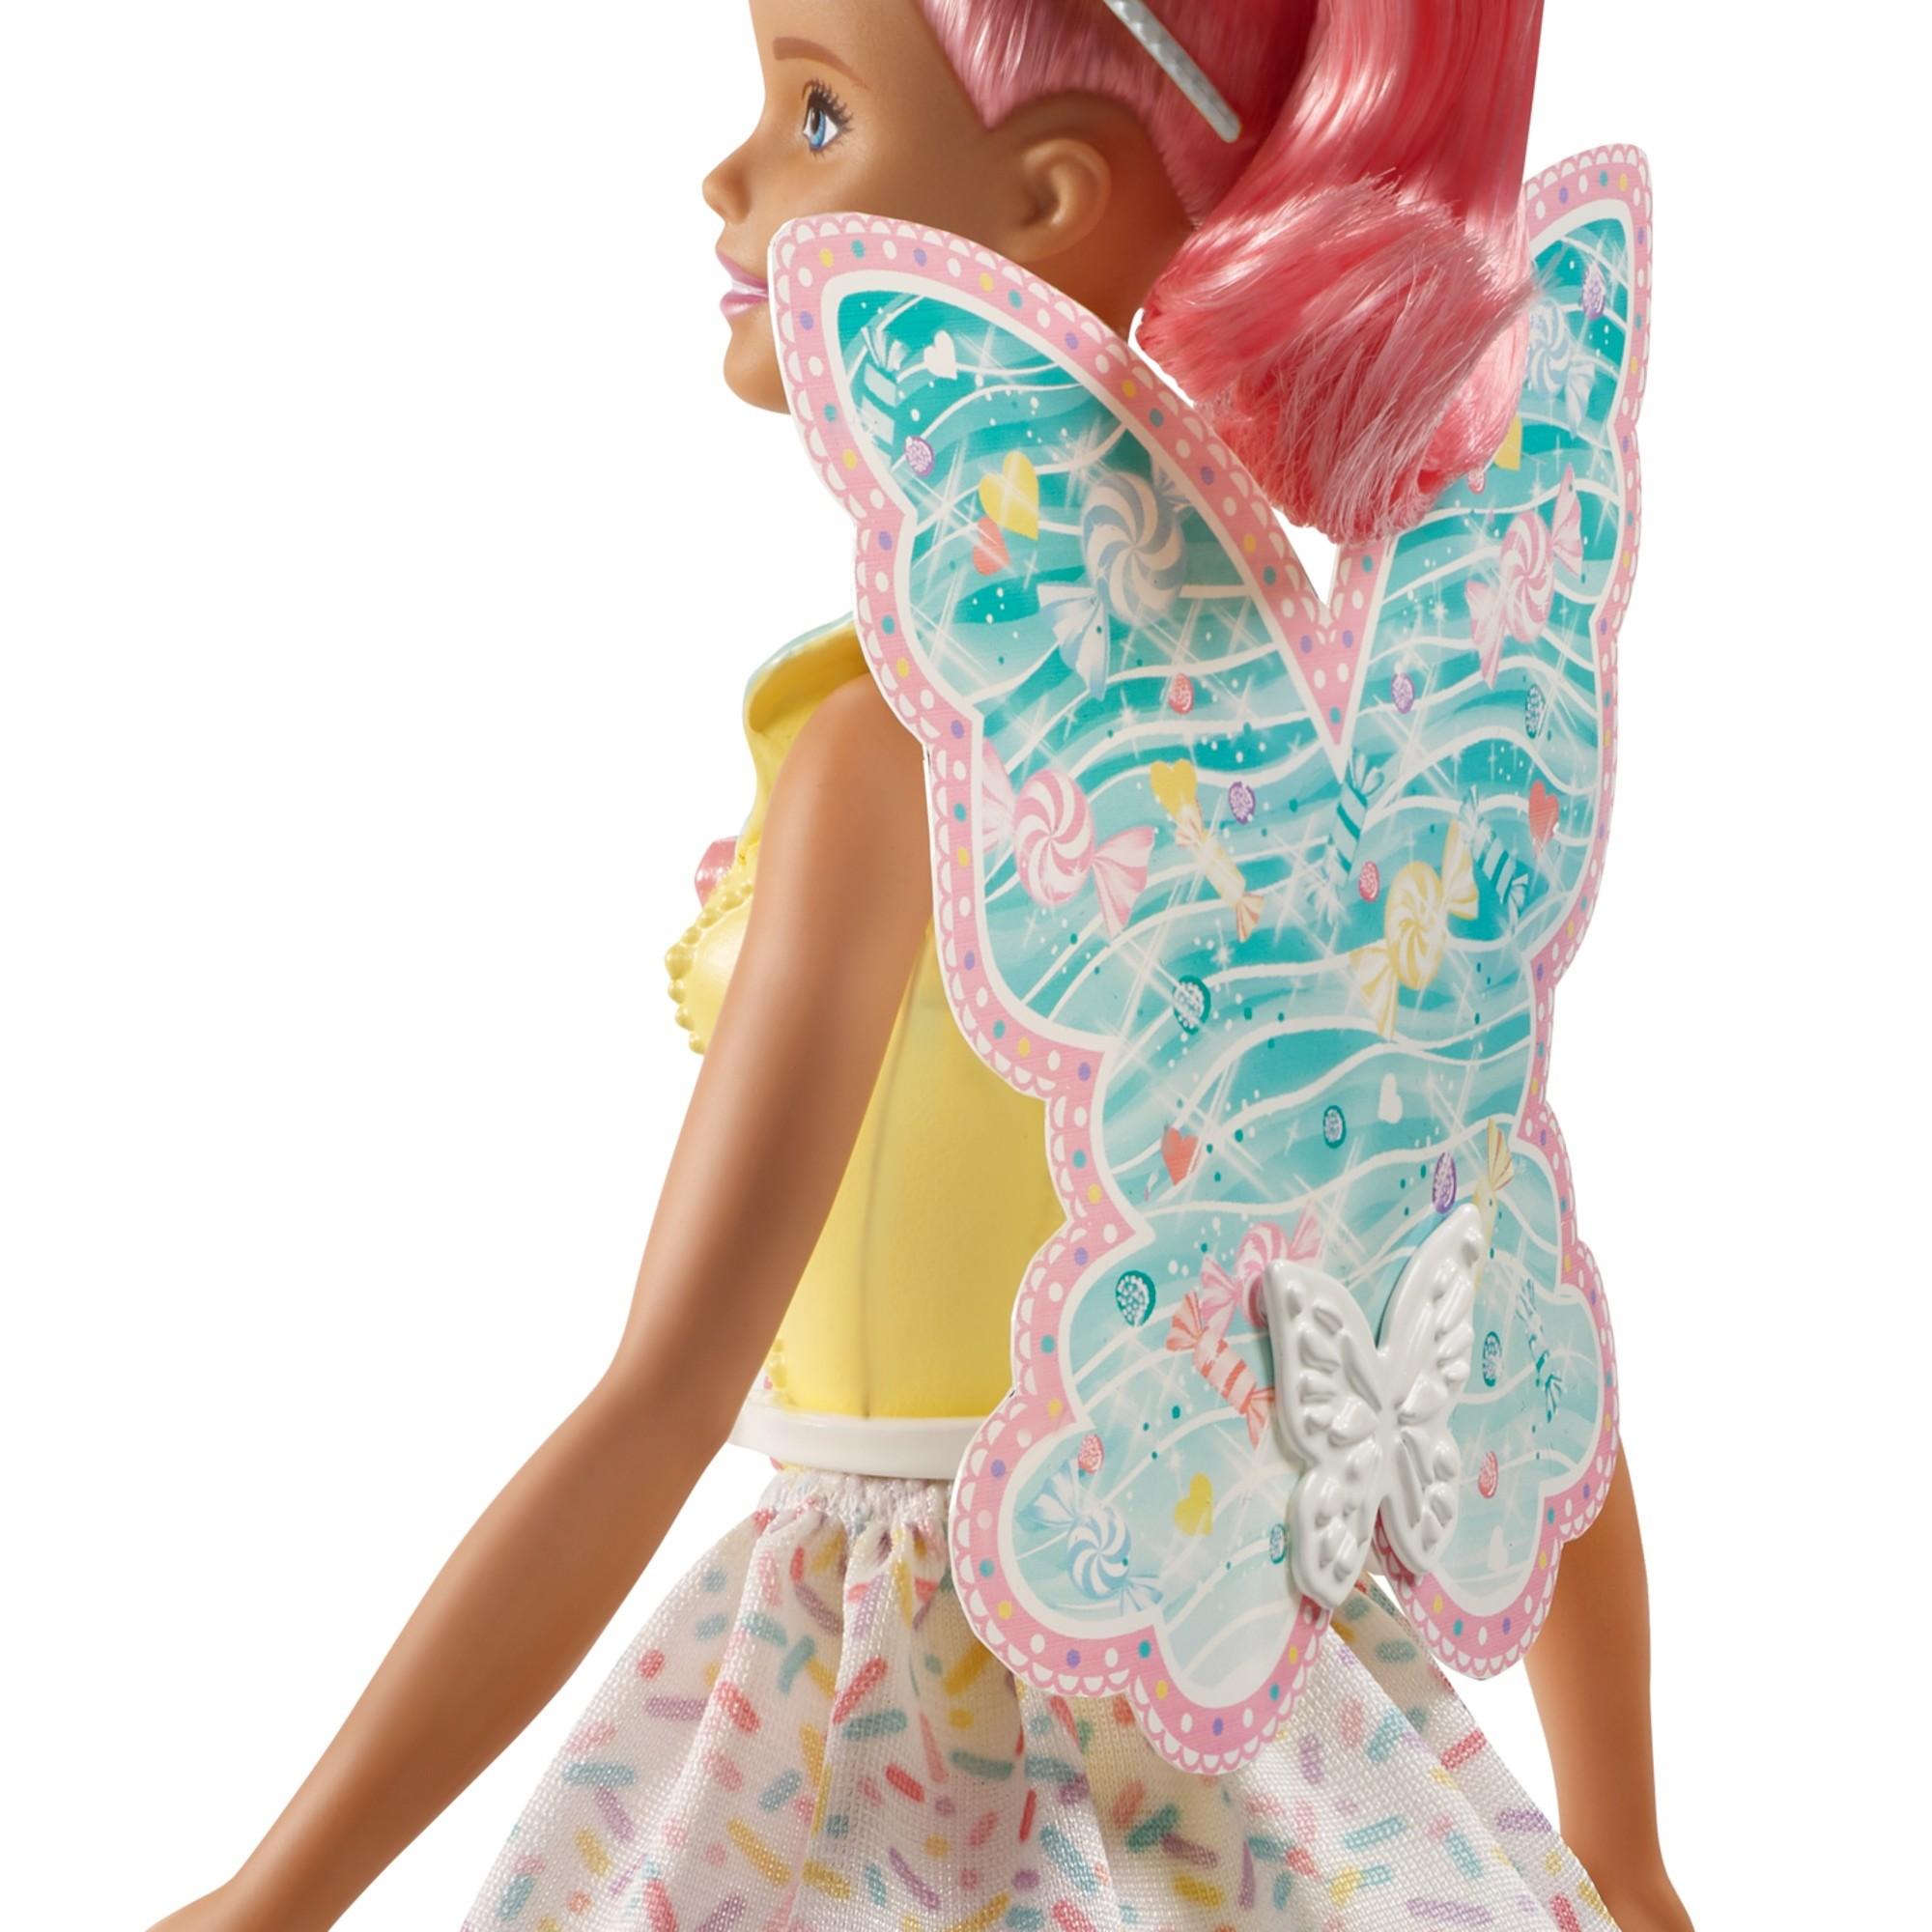 Barbie Dreamtopia Fairy Doll, Pink Hair & Candy-Decorated Wings - image 7 of 8